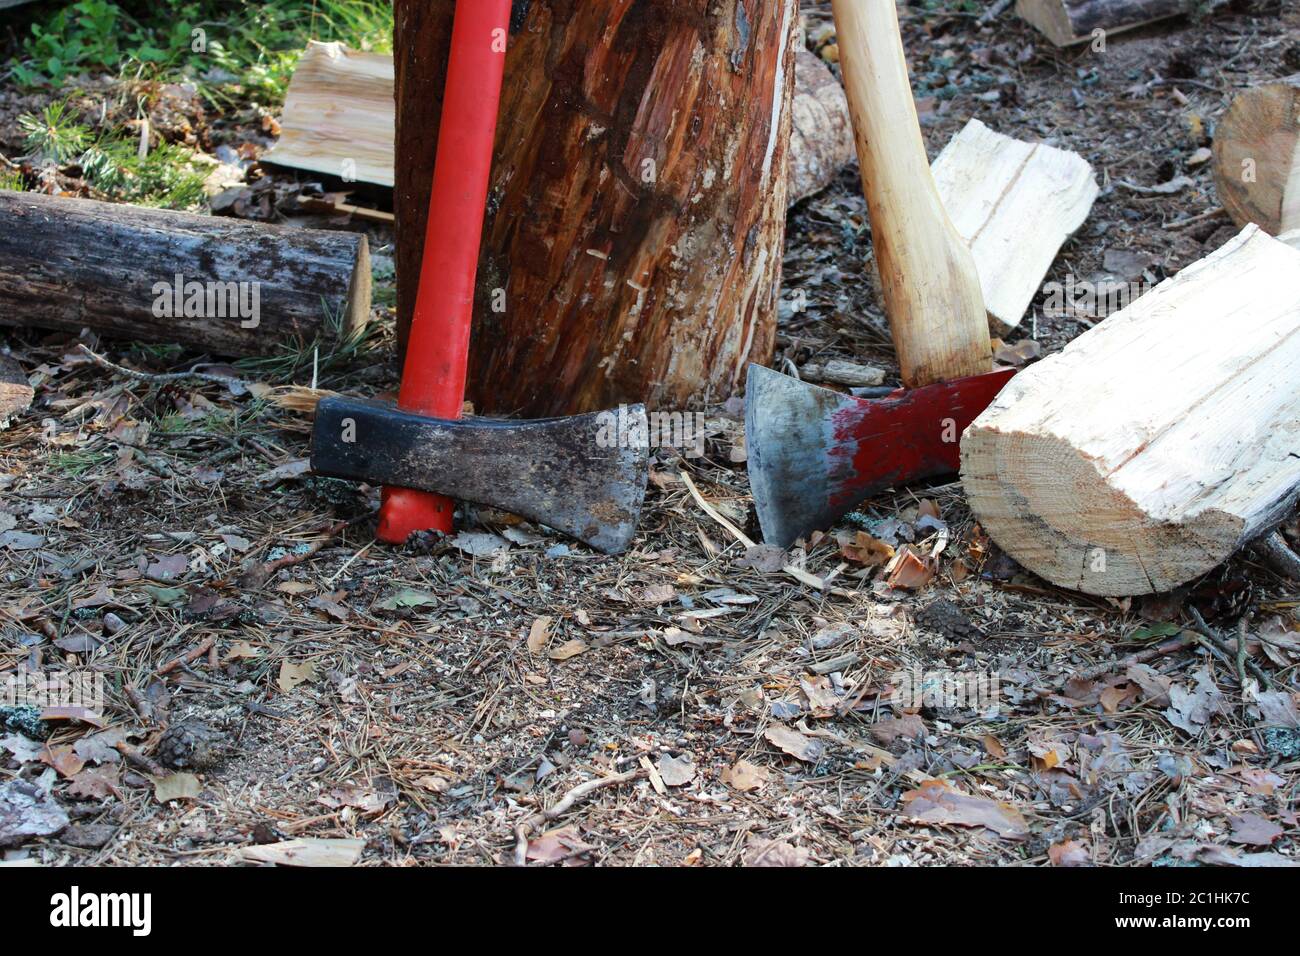 big axes with a red handle stands in the forest leaning against a wooden stump. for cooking firewood. Stock Photo